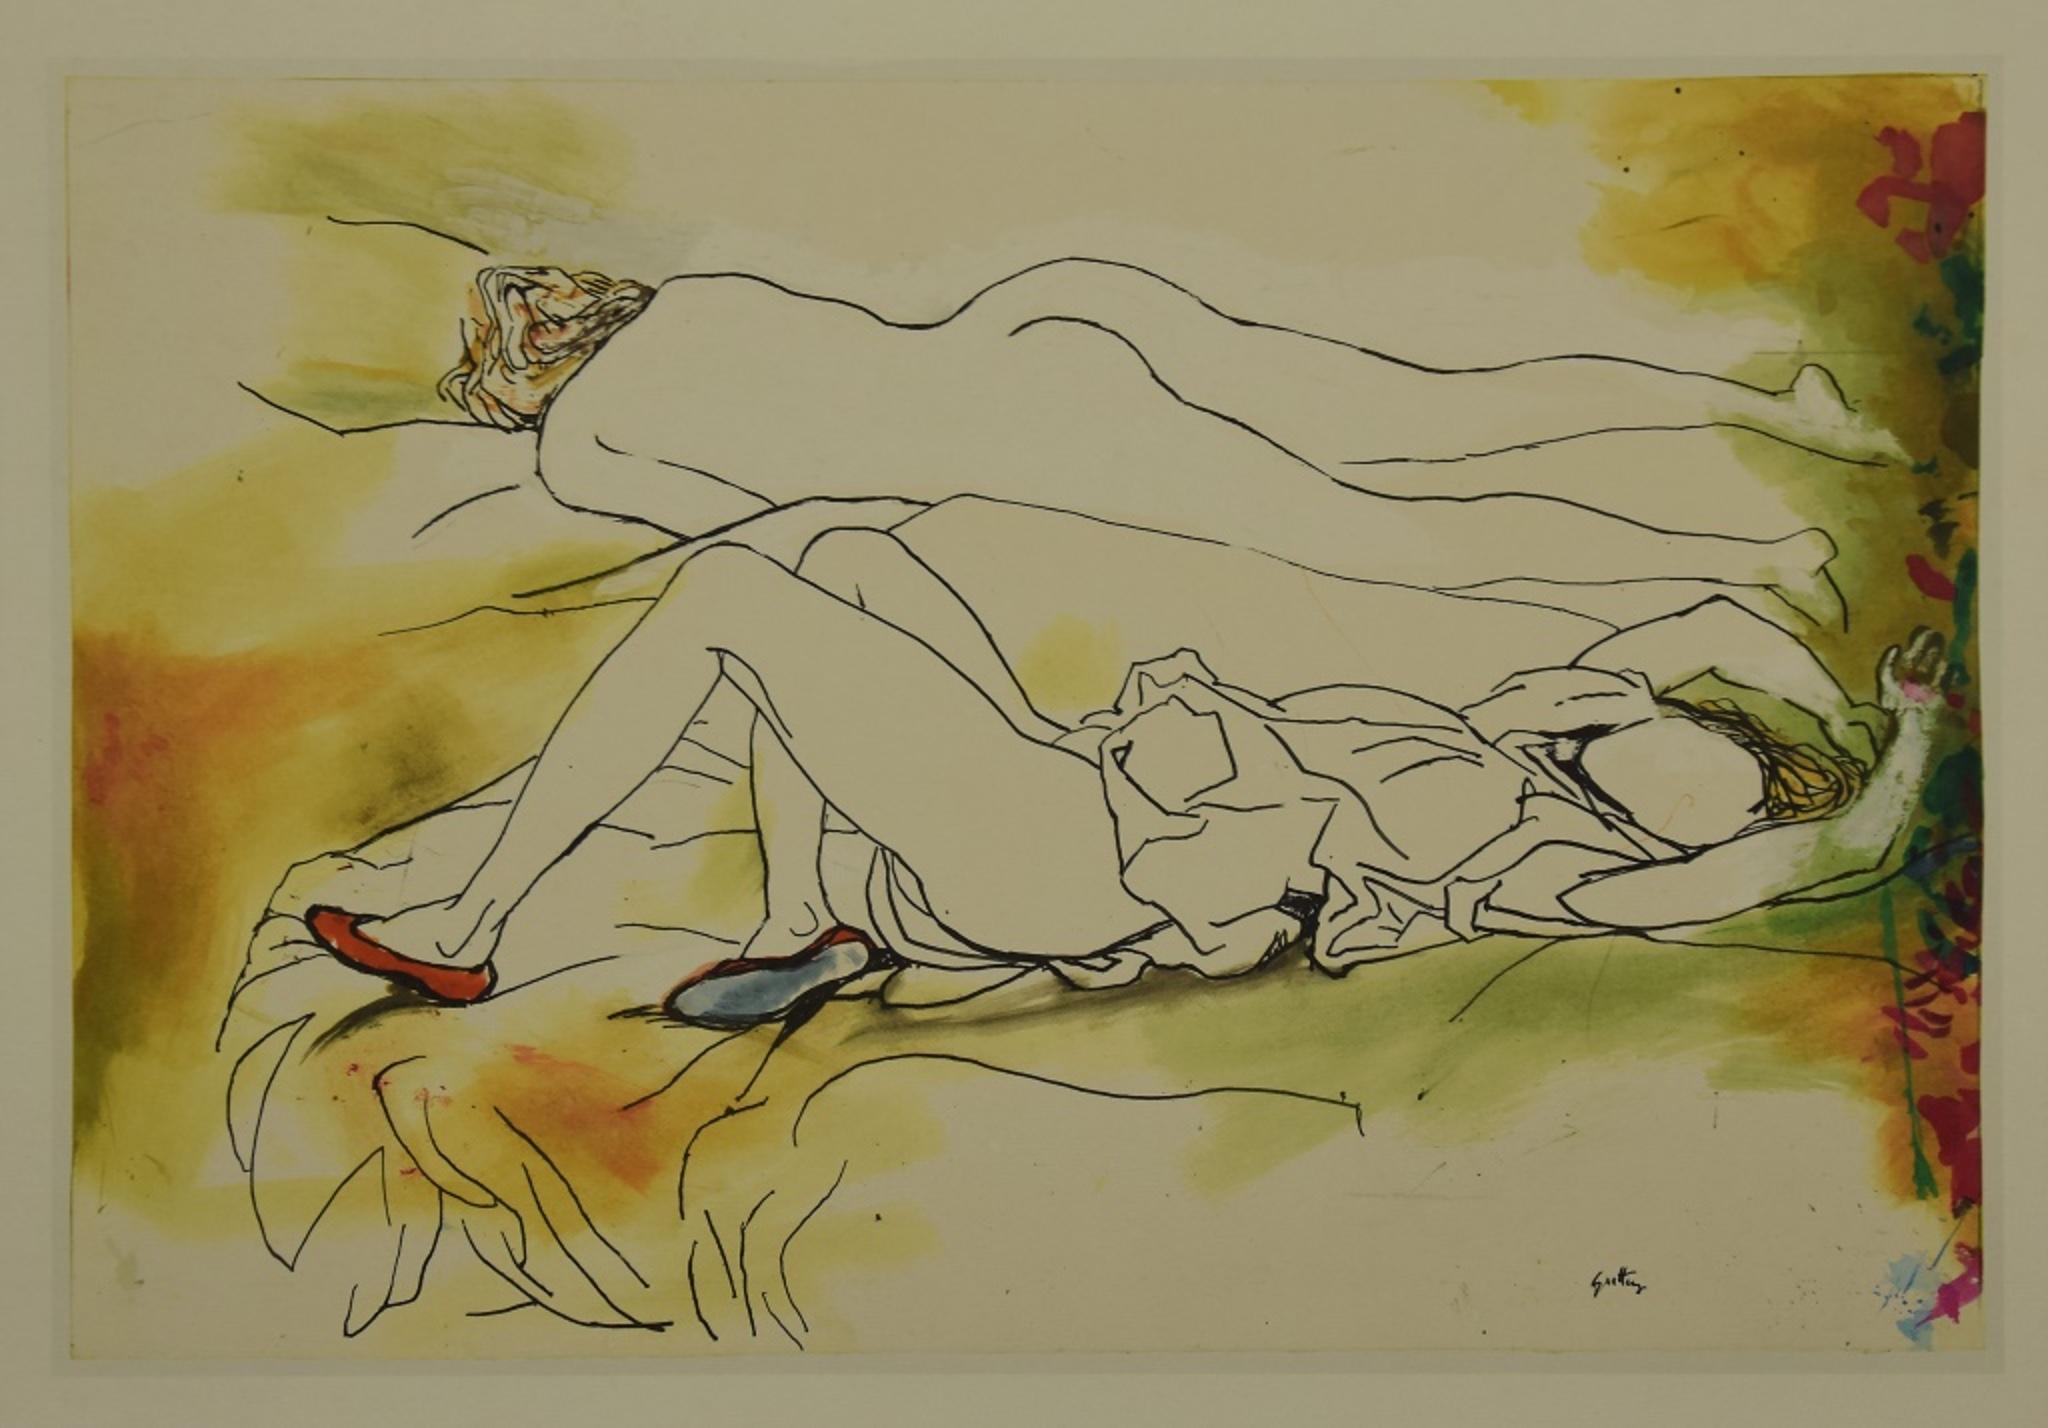 Woman Lying is an original offset realized by Renato Guttuso.

The picture is in very good conditions, no signature.

Renato Guttuso, born Aldo Renato Guttuso (26 December 1911 - 18 January 1987) was an Italian painter and politician, improperly